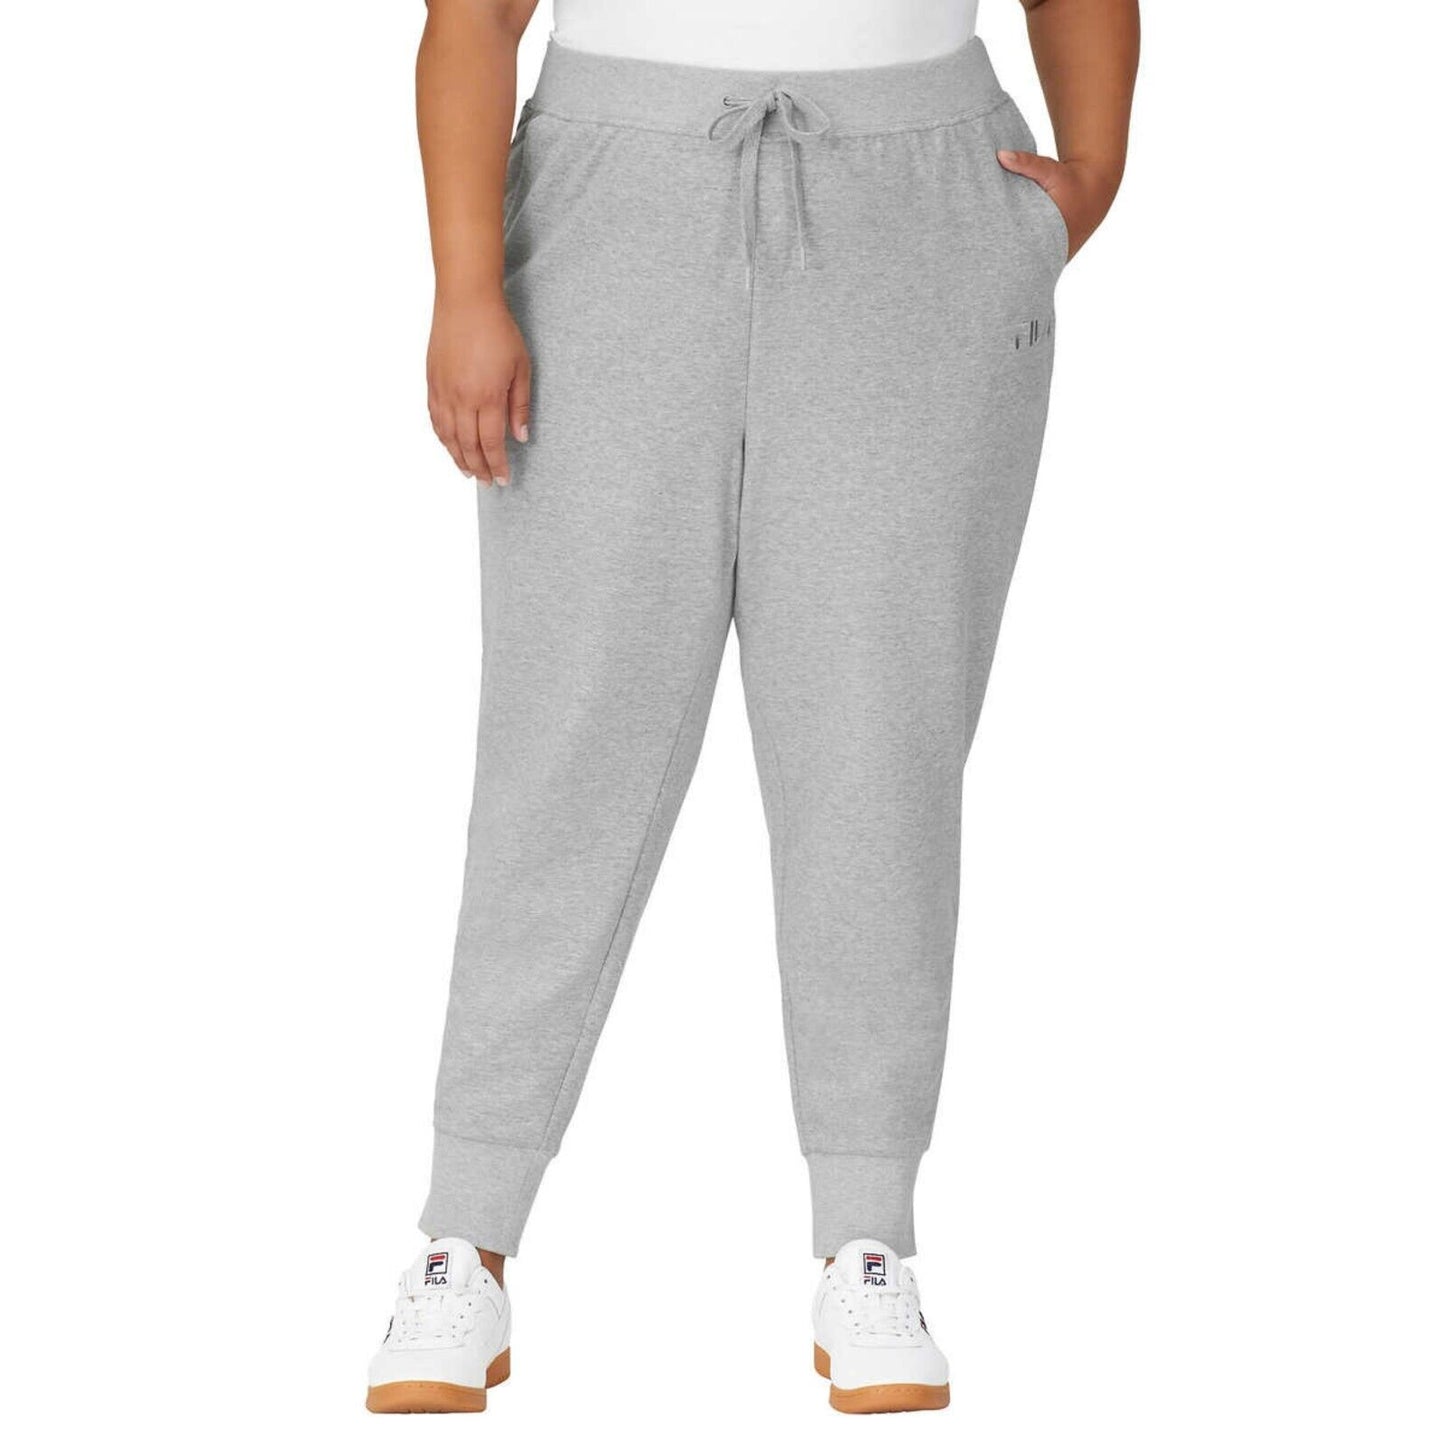 FILA Women's Soft Cotton Blend French Terry Active Pants Joggers